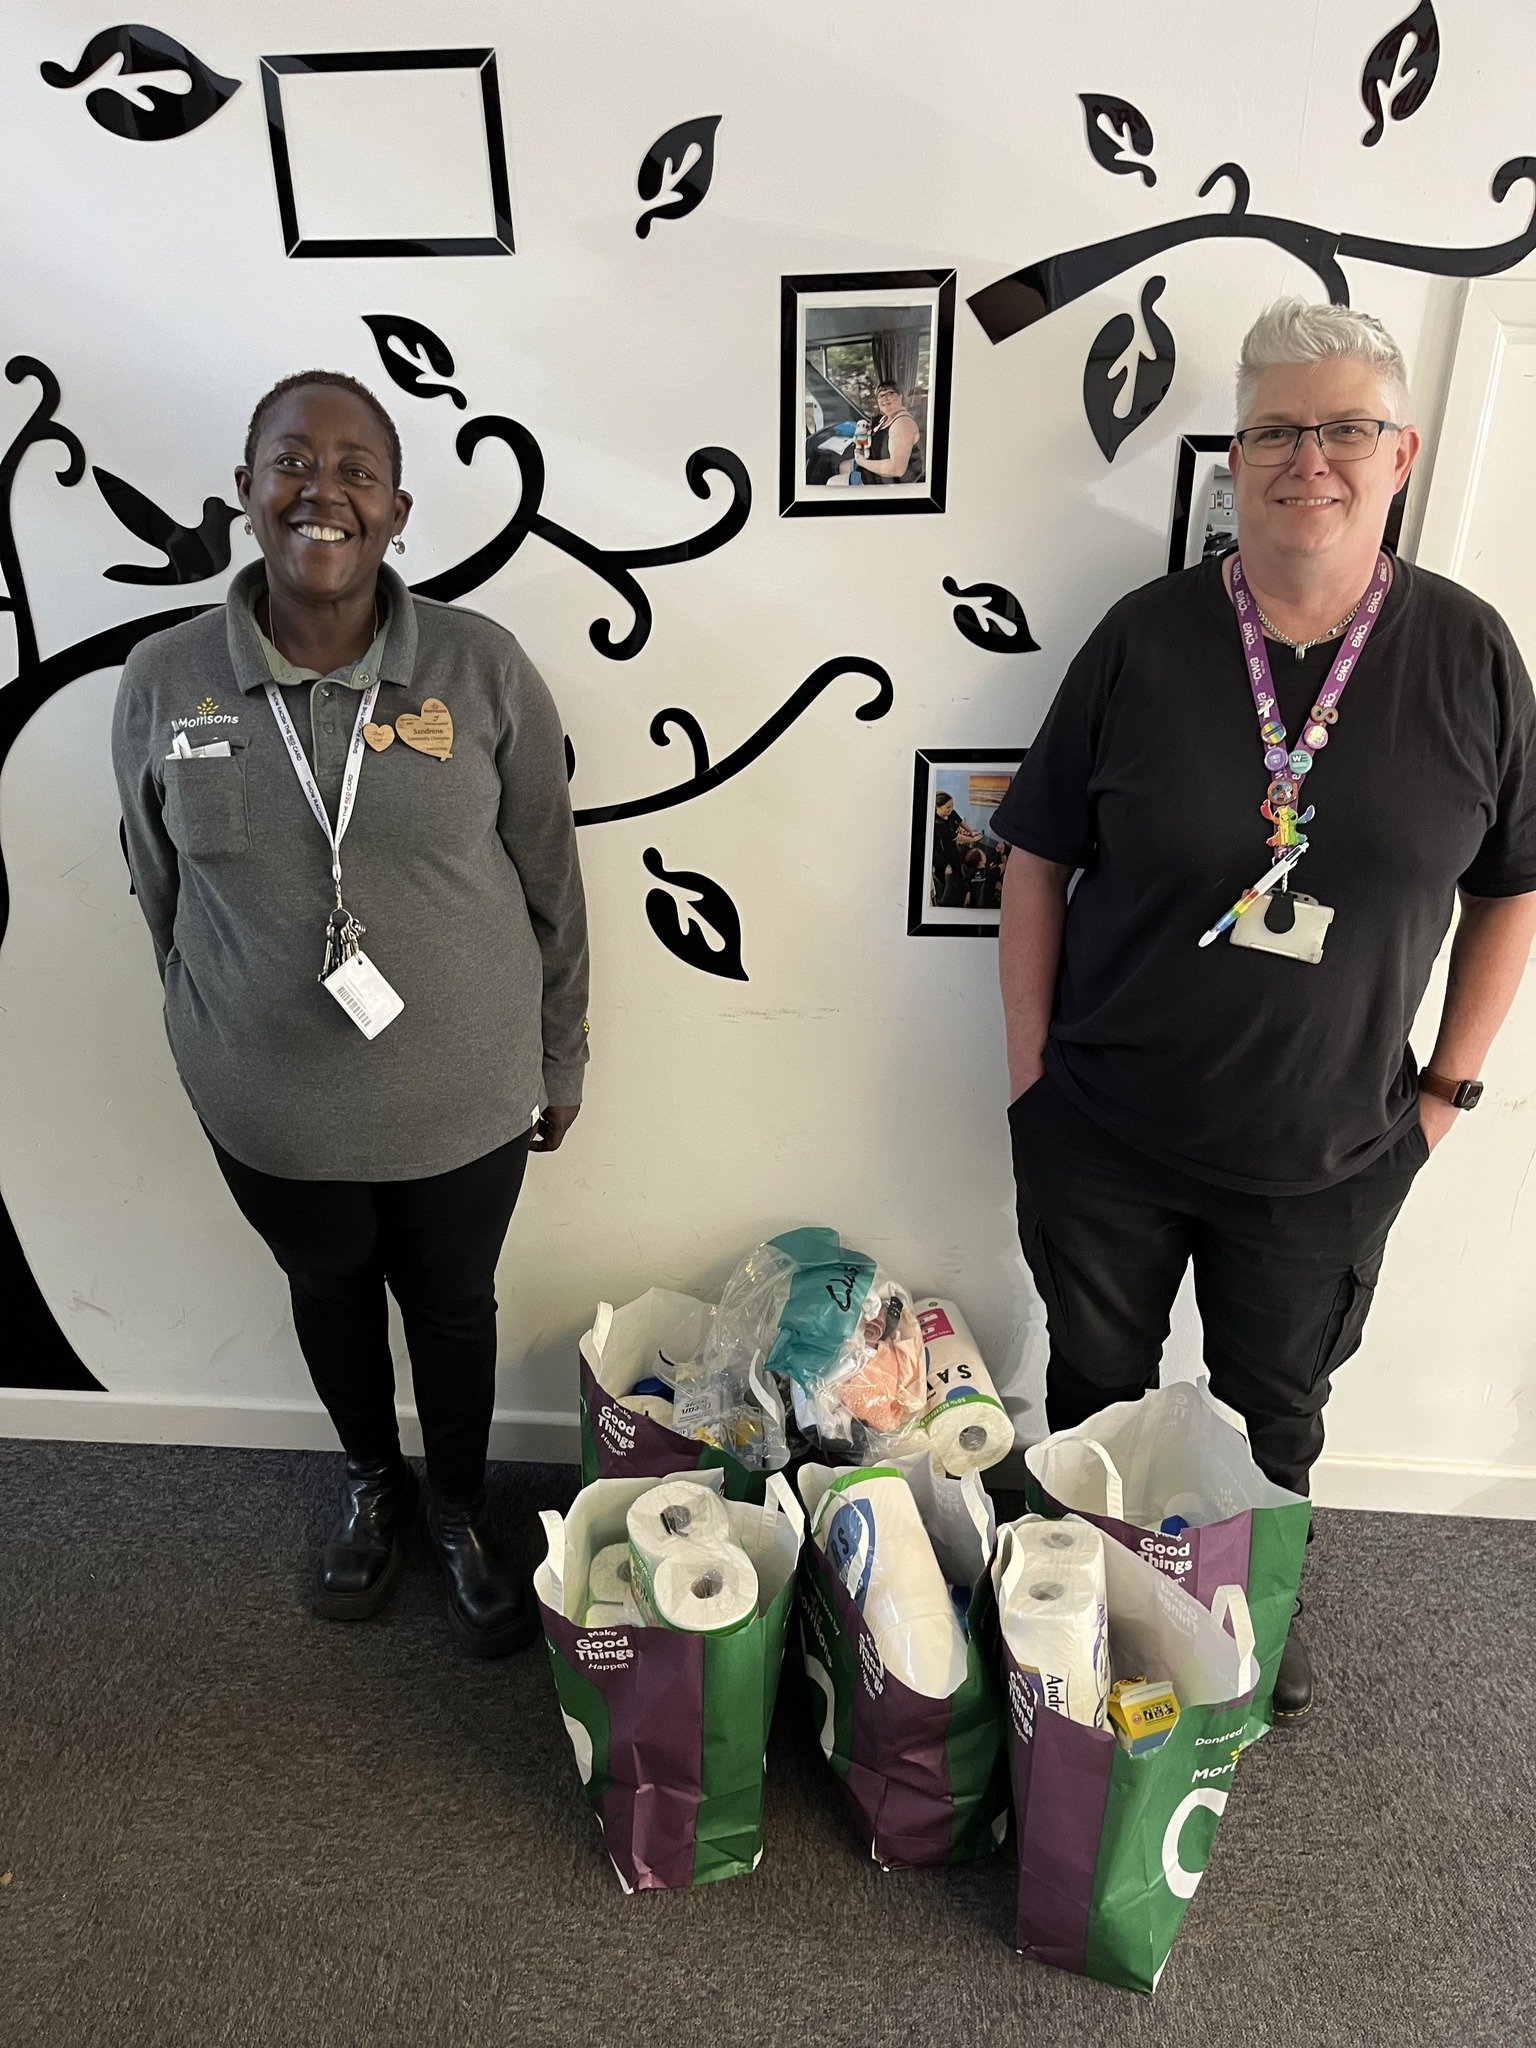 Thank you so much to @morrisons Community Champion, Sandrena, for this much-needed donation of everyday essentials for our refuge accommodation residents ✨

If you'd like to support us with donations of your own, please visit our website www.mycwa.or